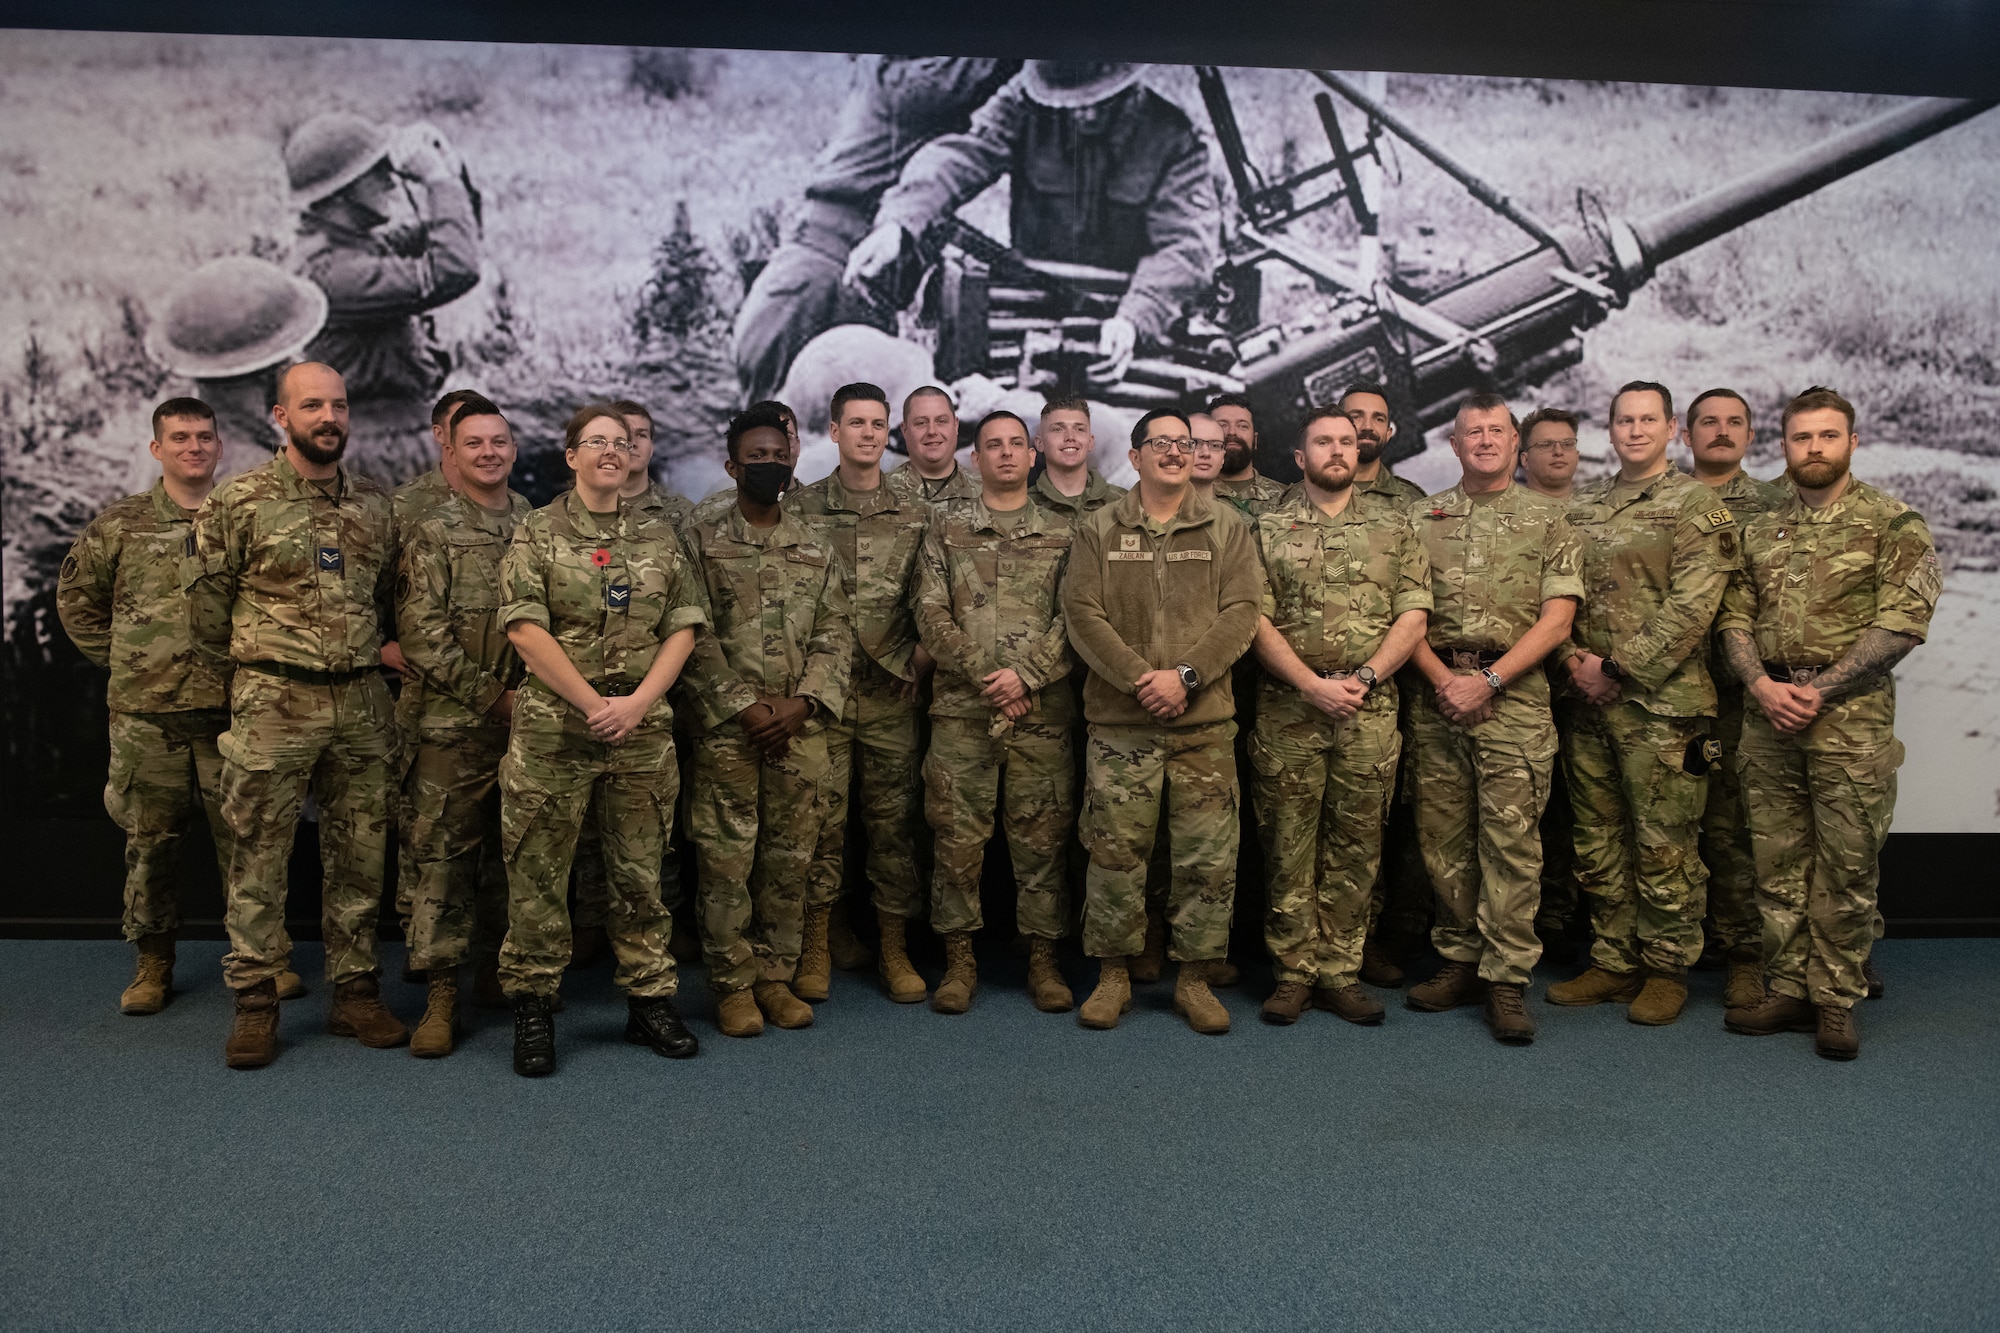 U.S and Royal Air Force personnel pose for a photo in the heritage hall on RAF Honington, England, Nov. 10, 2022. RAF Honington hosted U.S. Air Force noncommissioned officers for a leadership exchange program, strengthening ties between partner nations. (U.S. Air Force photo by Staff Sgt. Charles Welty)